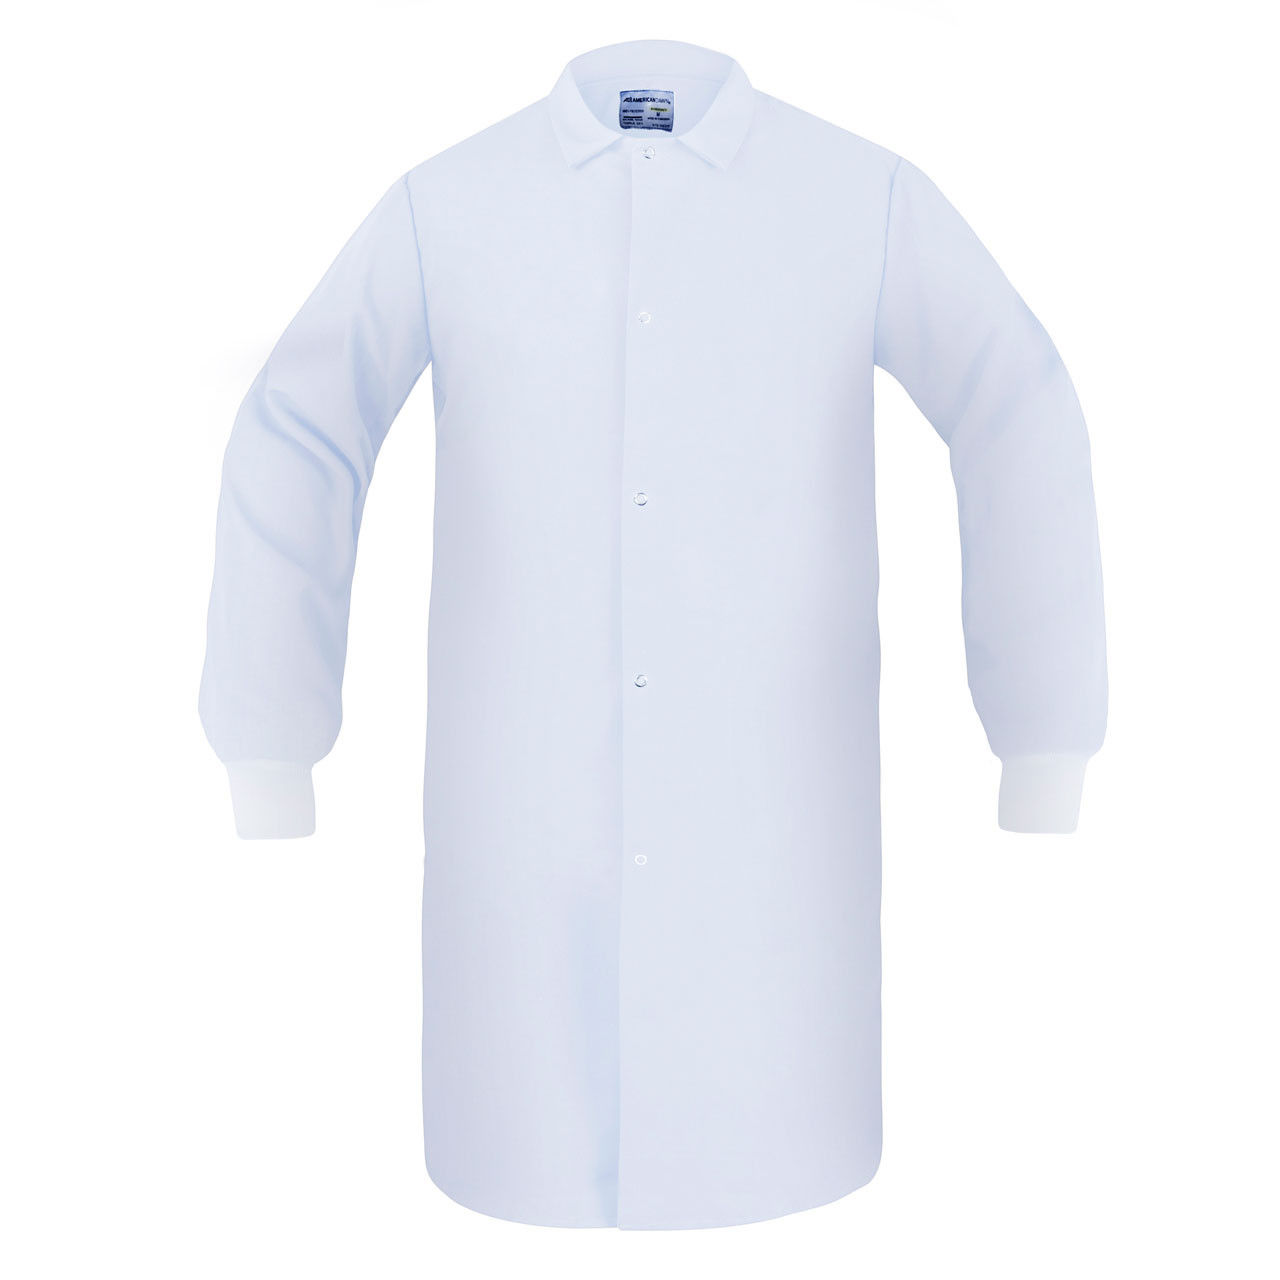 What is the size chart for the HACCP Frock in the ADI haccp uniforms range?